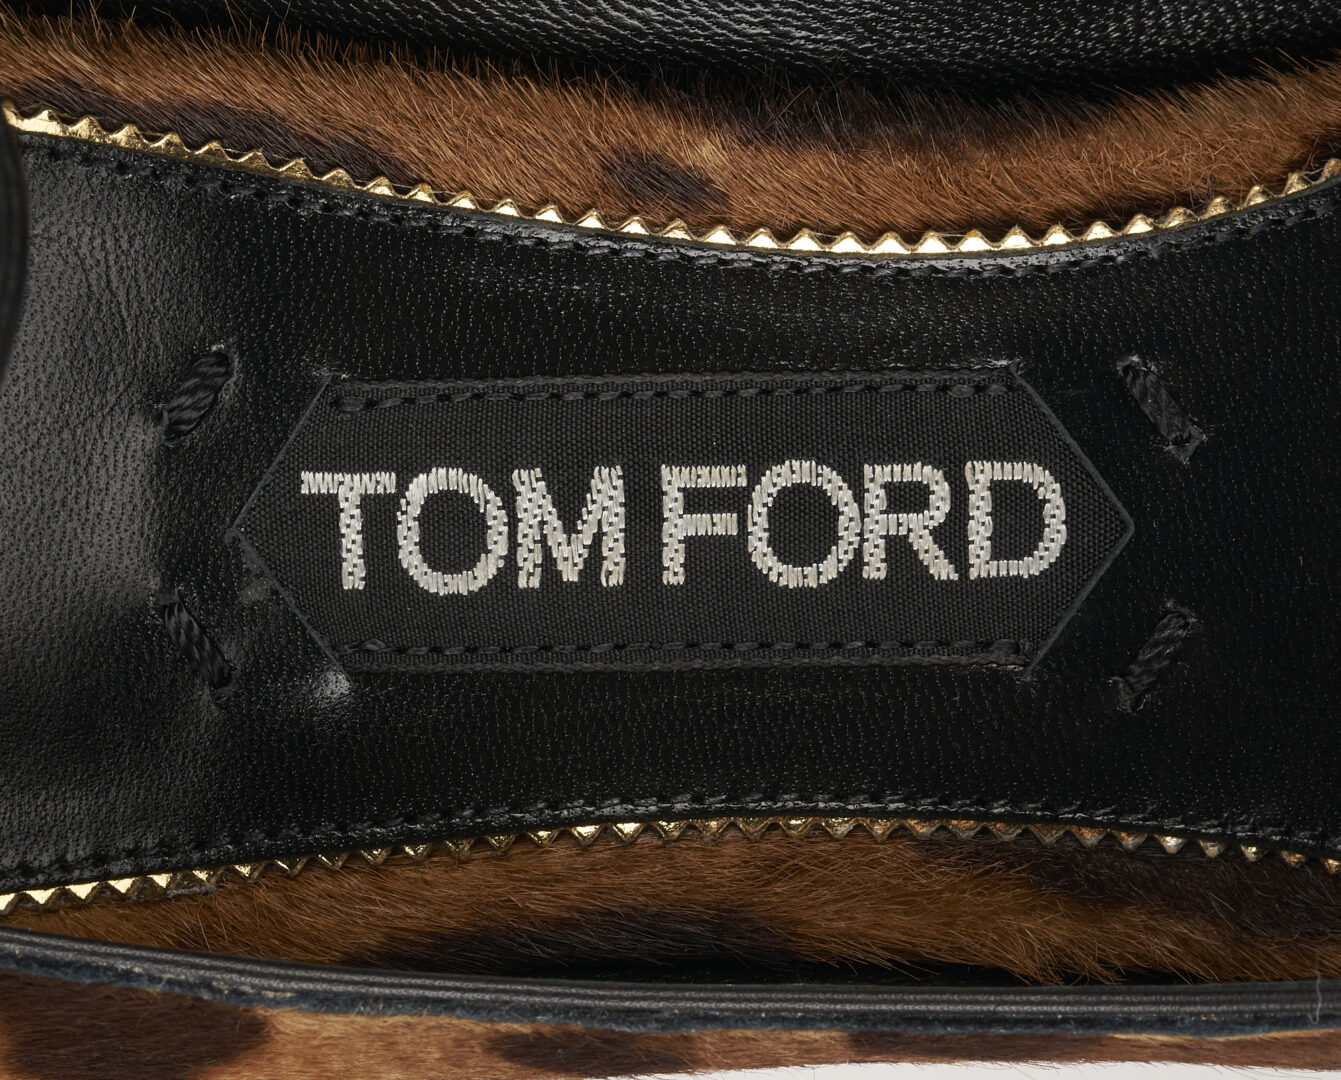 Lot 144: 4 Pairs of Tom Ford Shoes, Python & Leopard Print